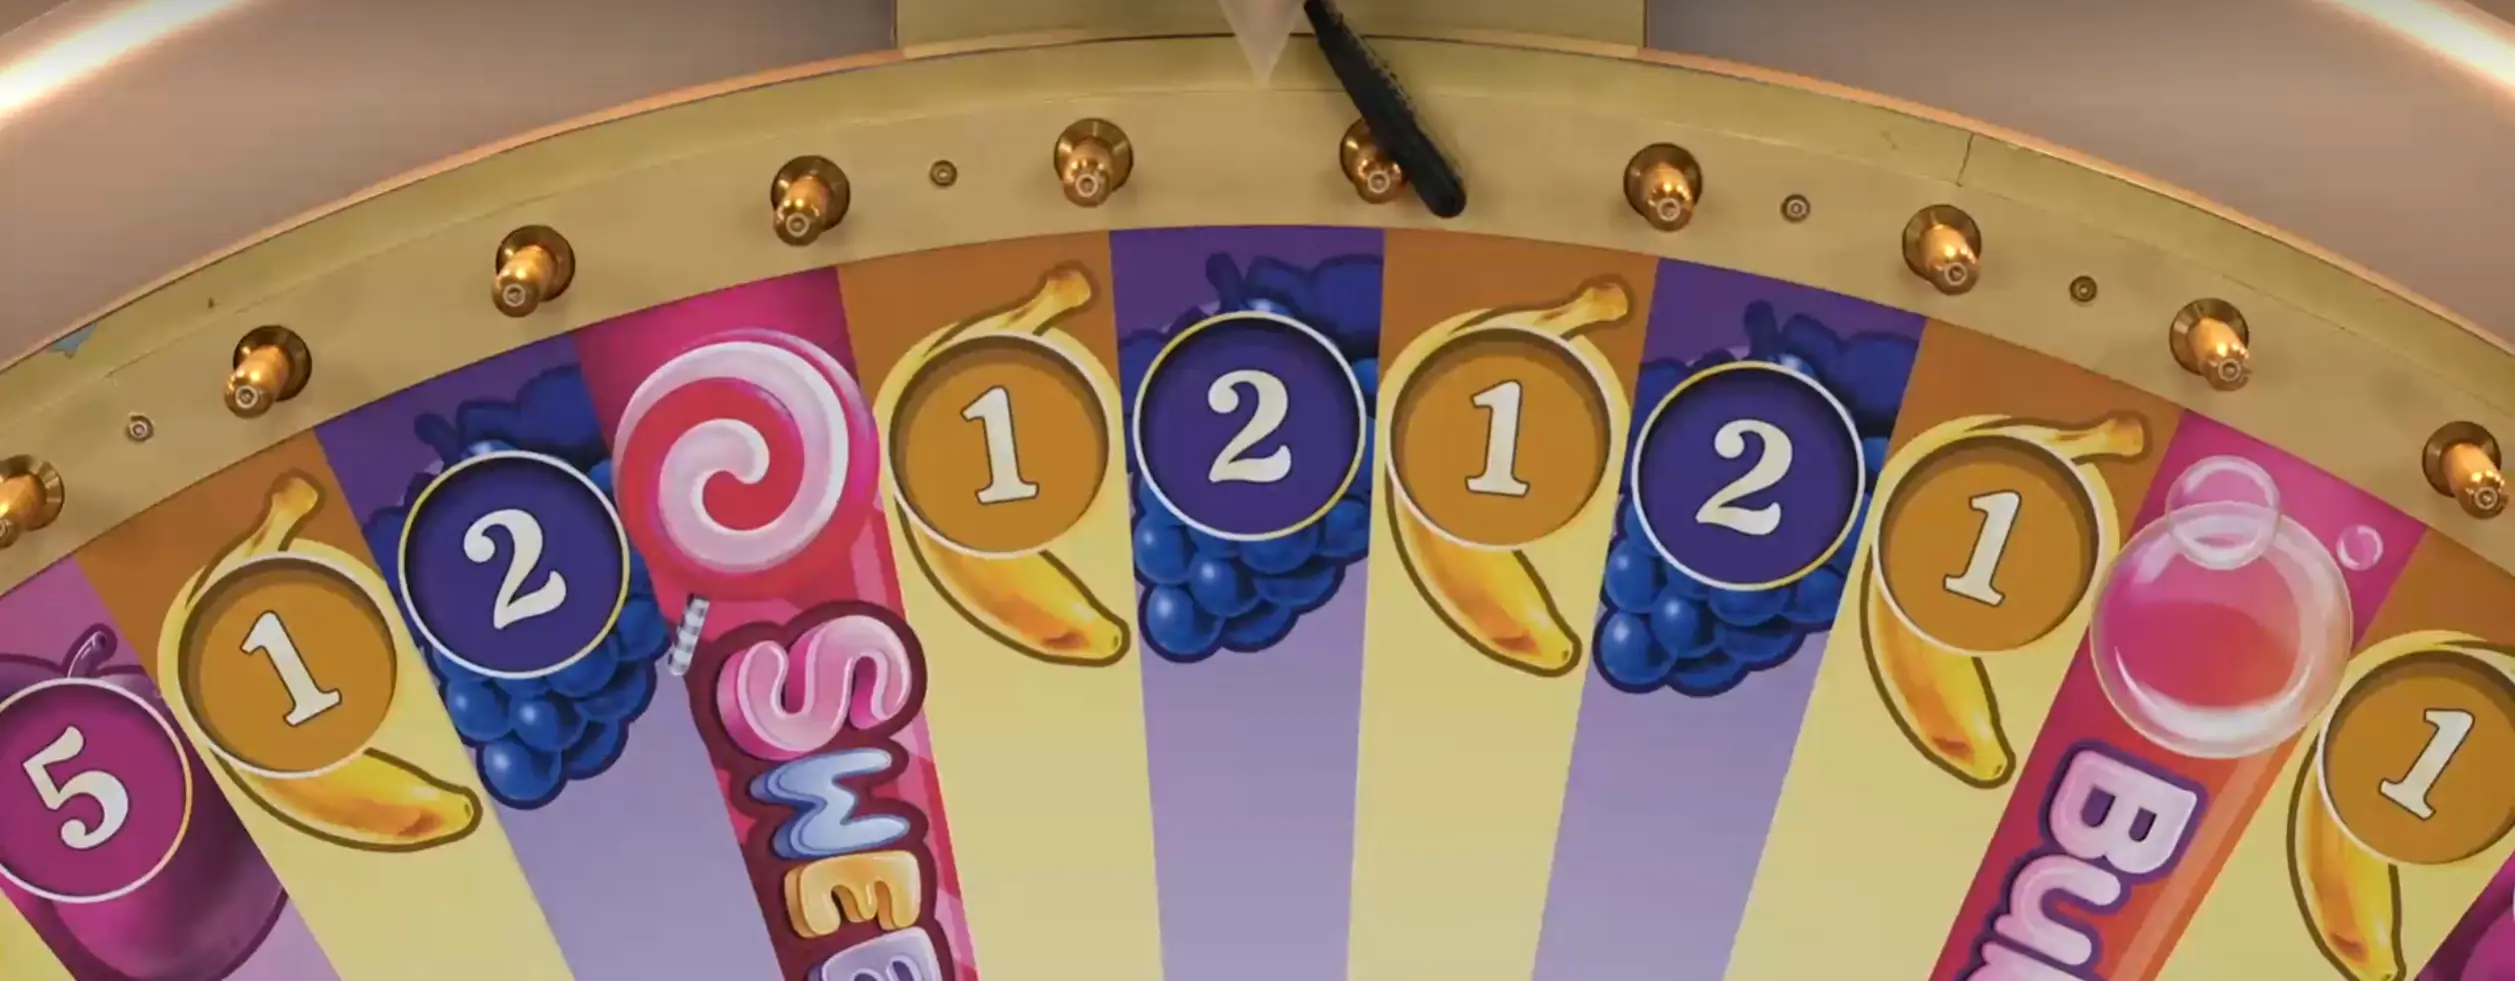 The outer edge of the delightful Sweet Bonanza Candyland features a standing golden wheel adorned with 54 segments, each showcasing a diverse array of sweet treat symbols such as bananas, grapes, and plums.